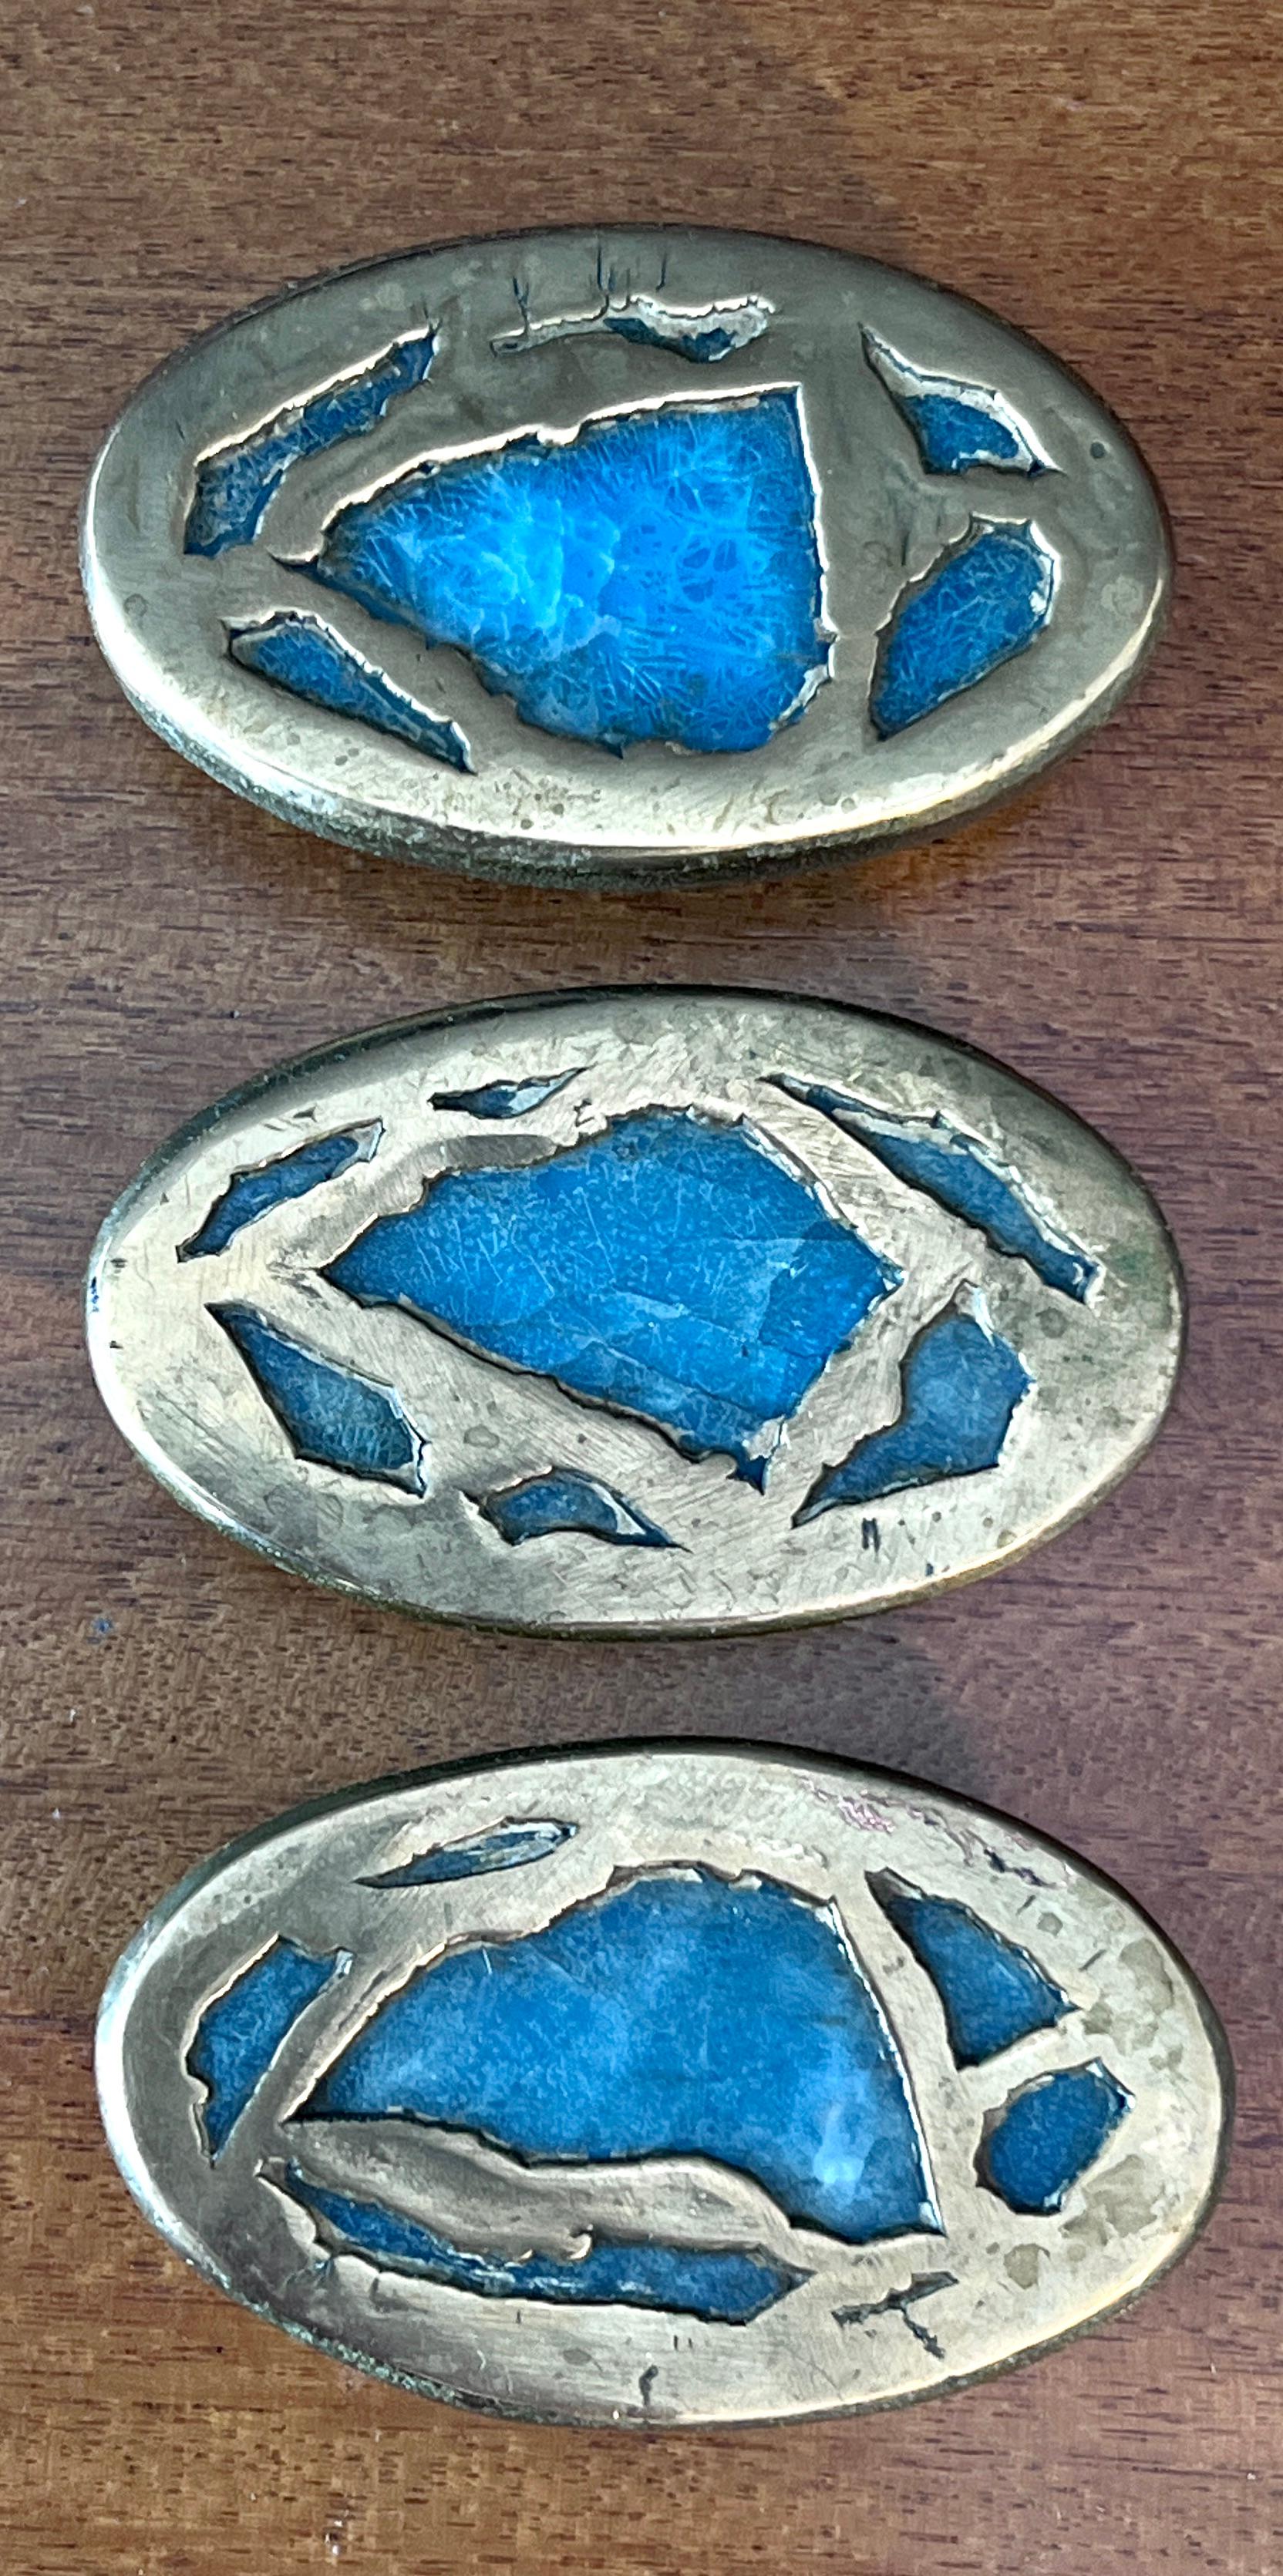 A set of three bronze and stone door or drawer pulls by Mexican artisan Pepe Mendoza.  

The three also have a round door pull, shown I one image, however sold separately.

The trio would be wonderful on an existing or new piece of furniture.  The